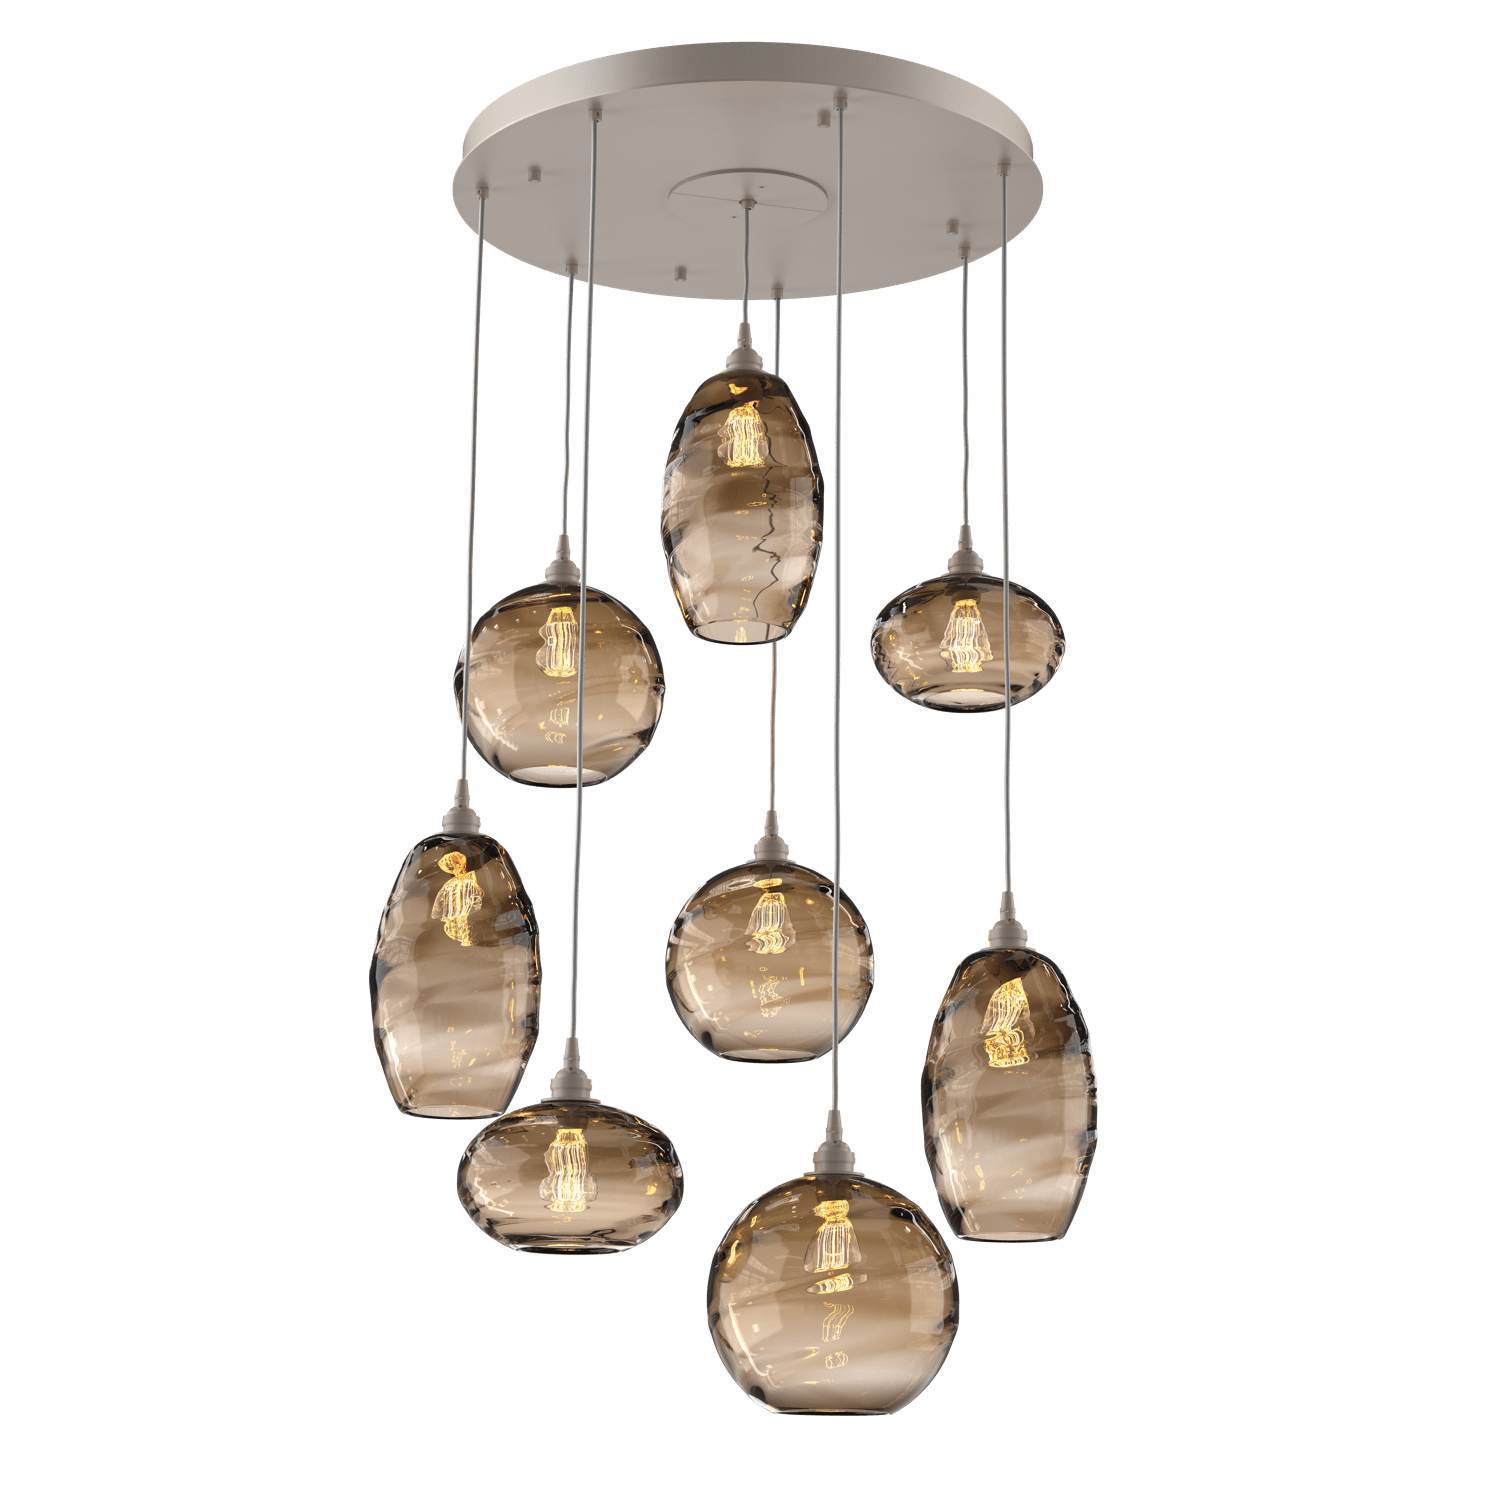 CHB0048-08-BS-OB-Hammerton-Studio-Optic-Blown-Glass-Misto-8-light-round-pendant-chandelier-with-metallic-beige-silver-finish-and-optic-bronze-blown-glass-shades-and-incandescent-lamping